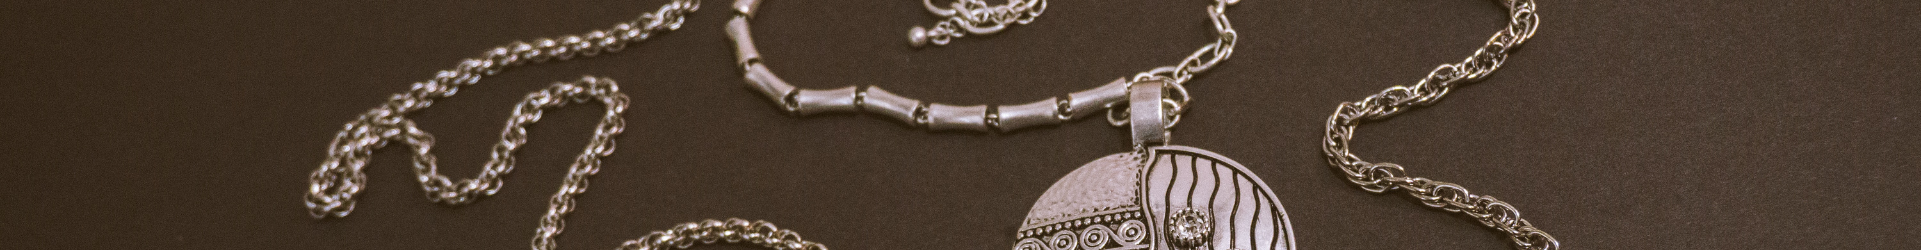 close up of silver necklace